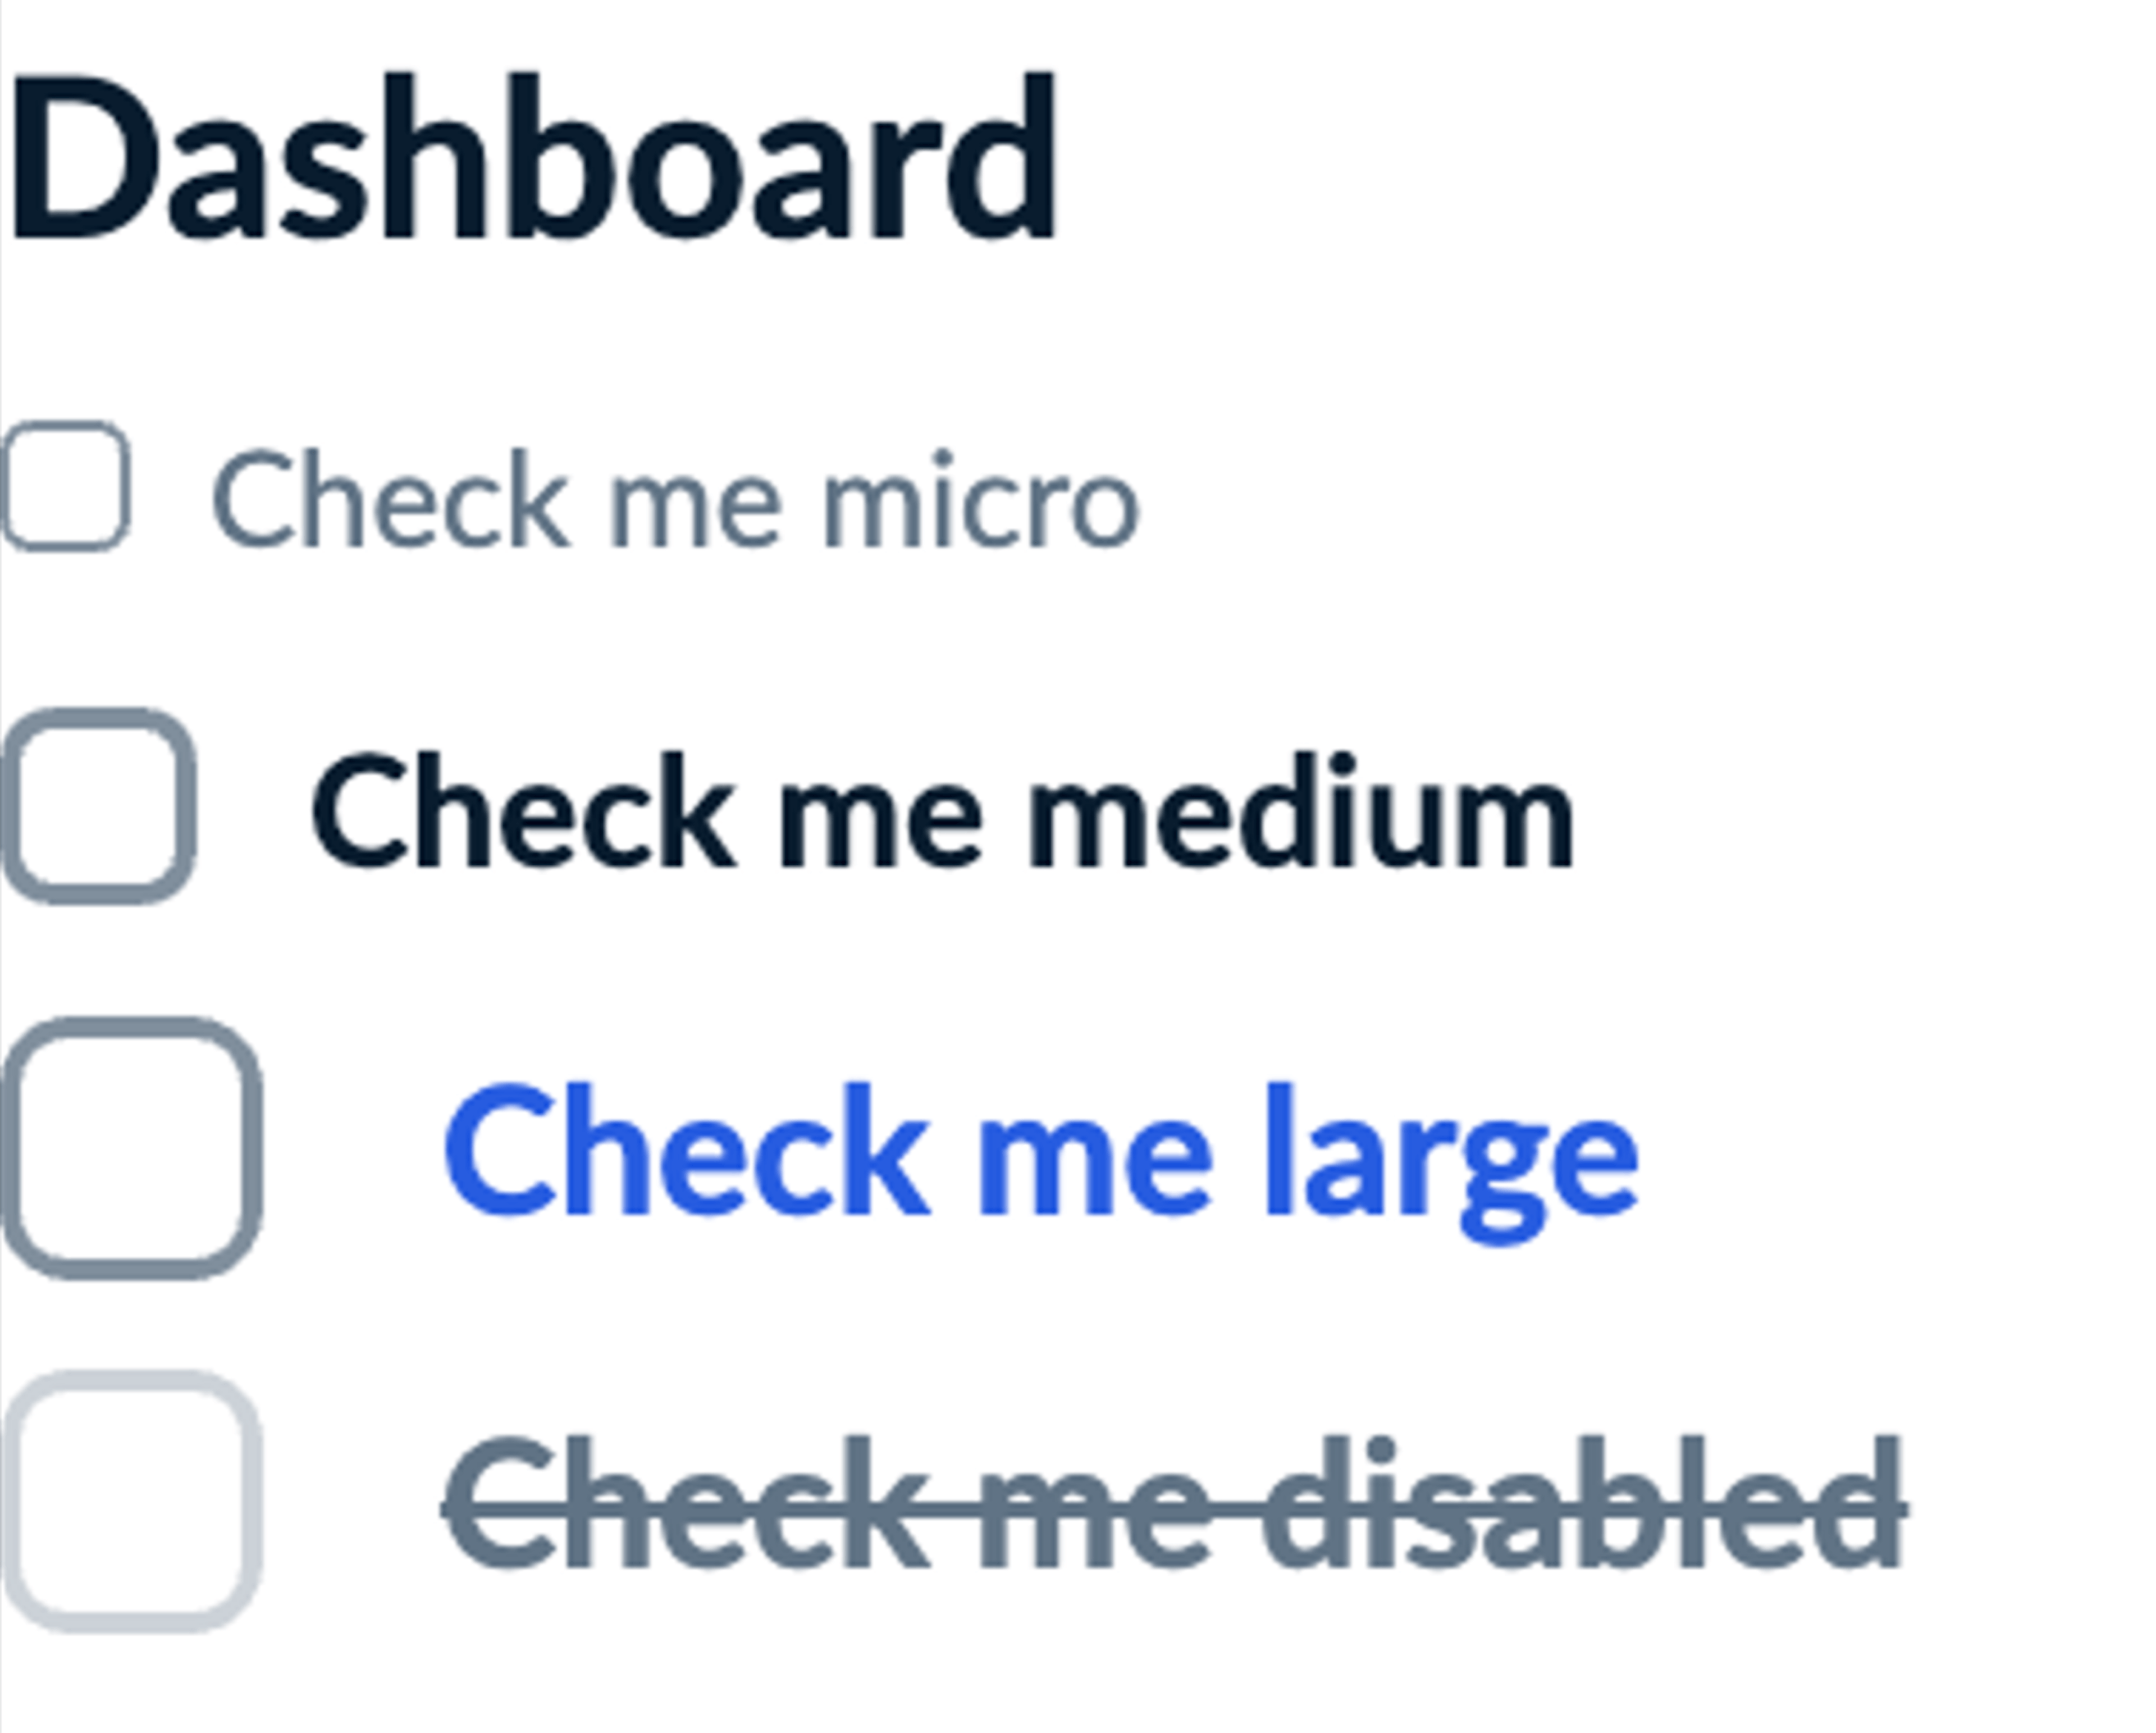 Checkbox after connecting style